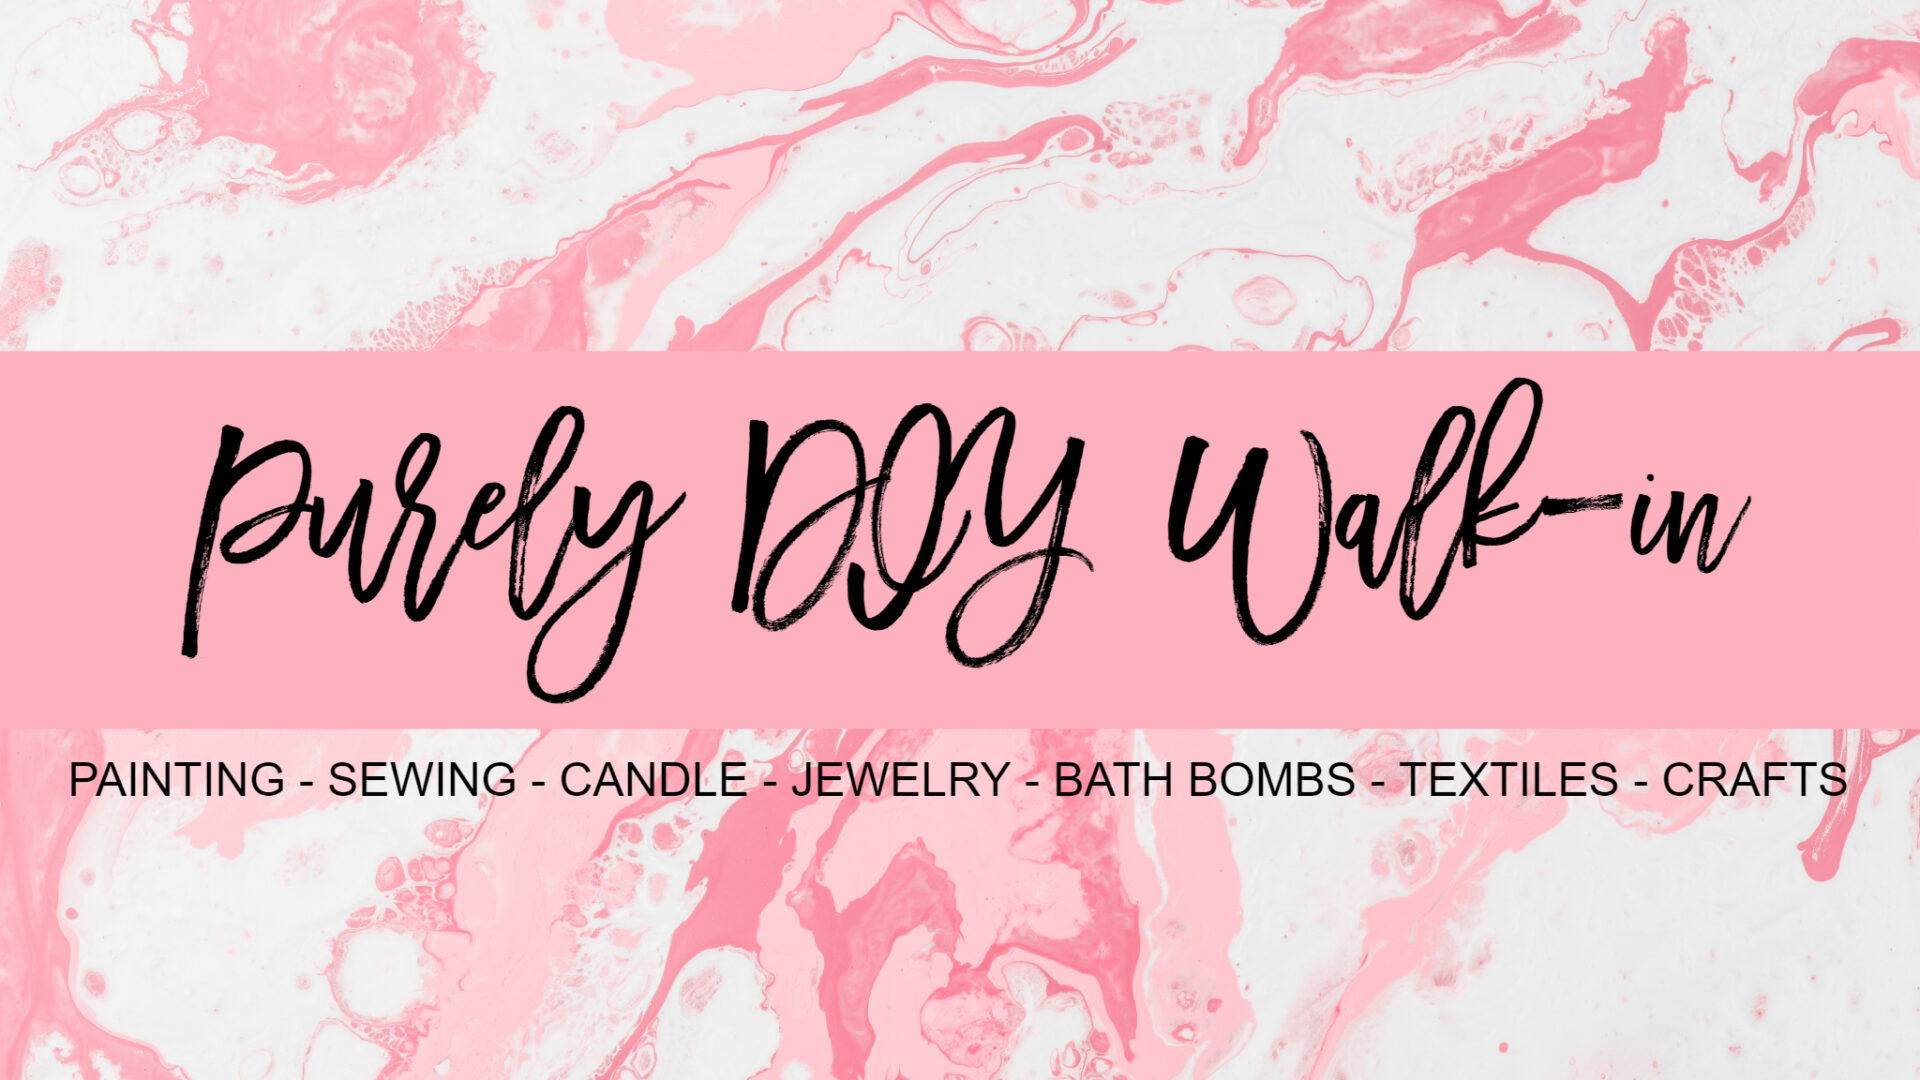 A pink and white marble background with the words weekly diy walk written in black.